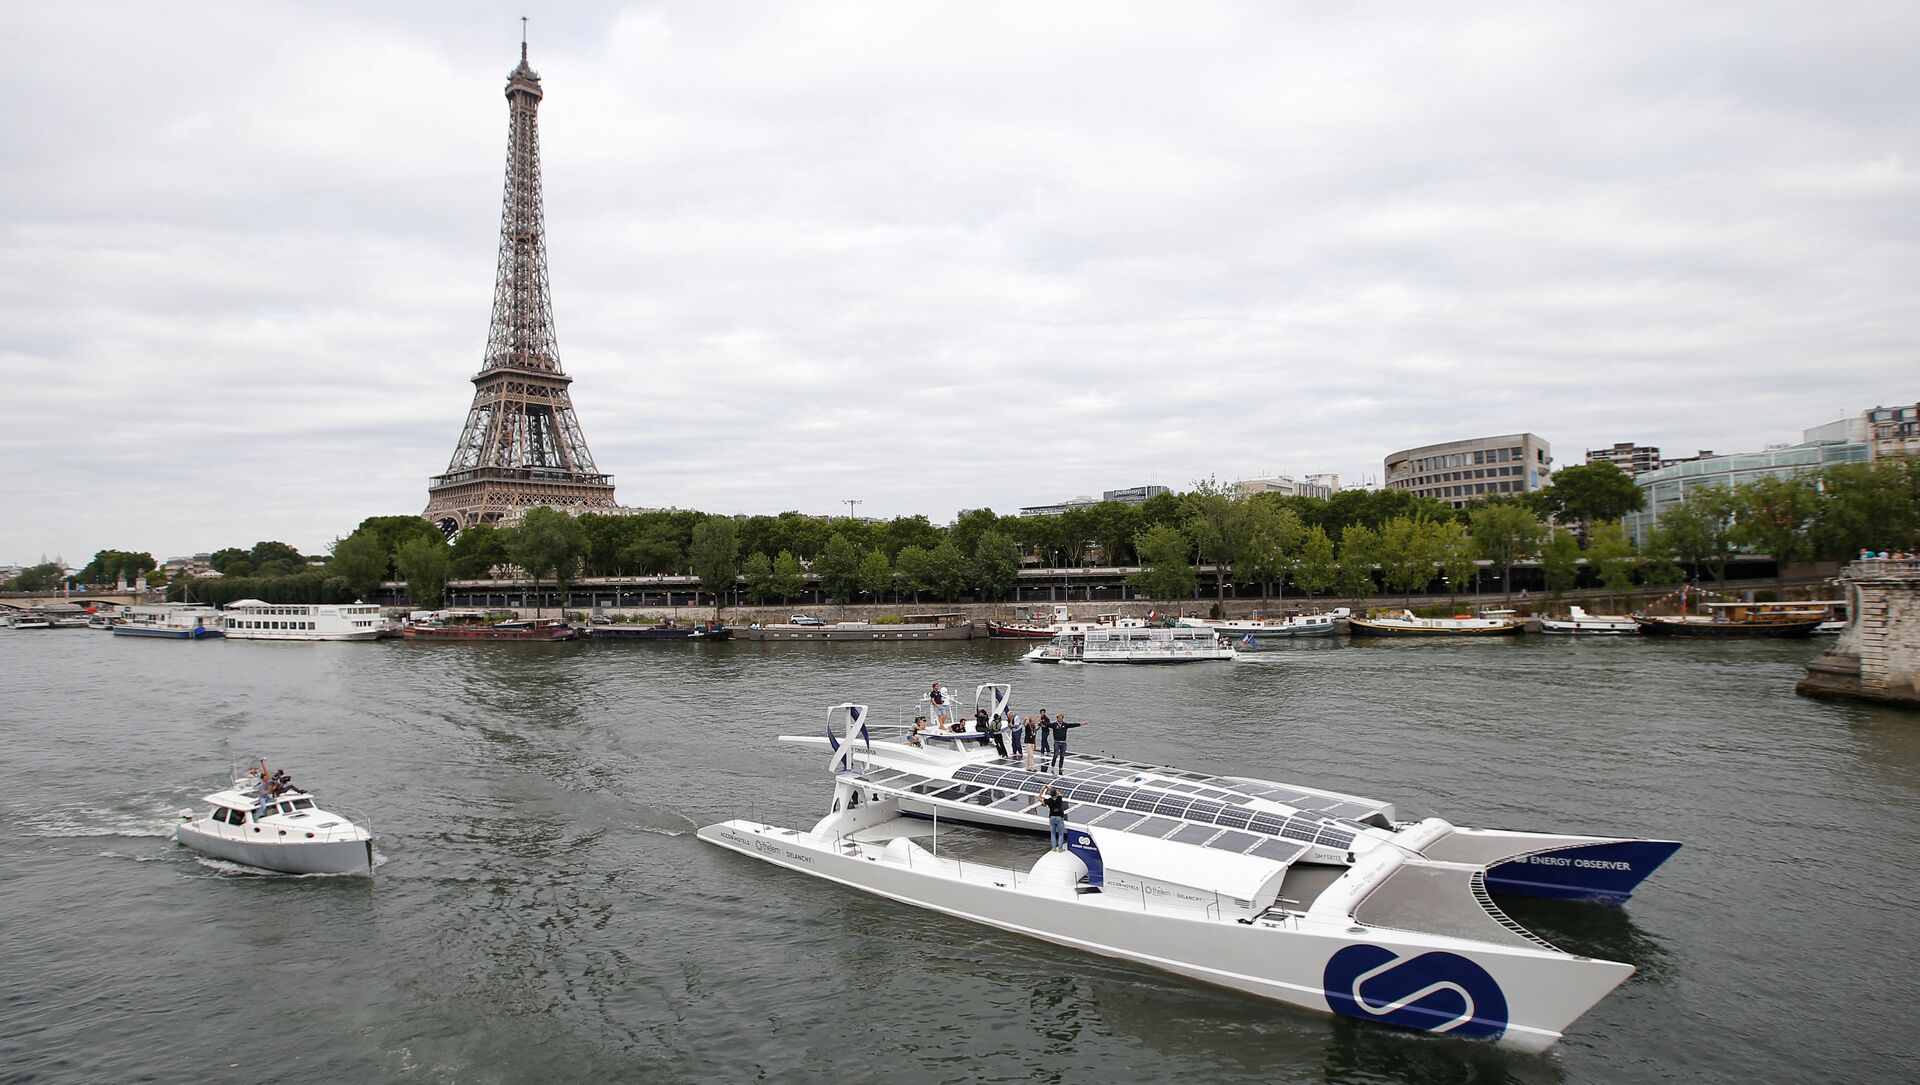 Energy Observer, the first self-sustainable eco-friendly boat, travels on the Seine river next to the Eiffel tower as it leaves for a world tour, in Paris, France July 15, 2017 - Sputnik Moldova, 1920, 10.05.2021